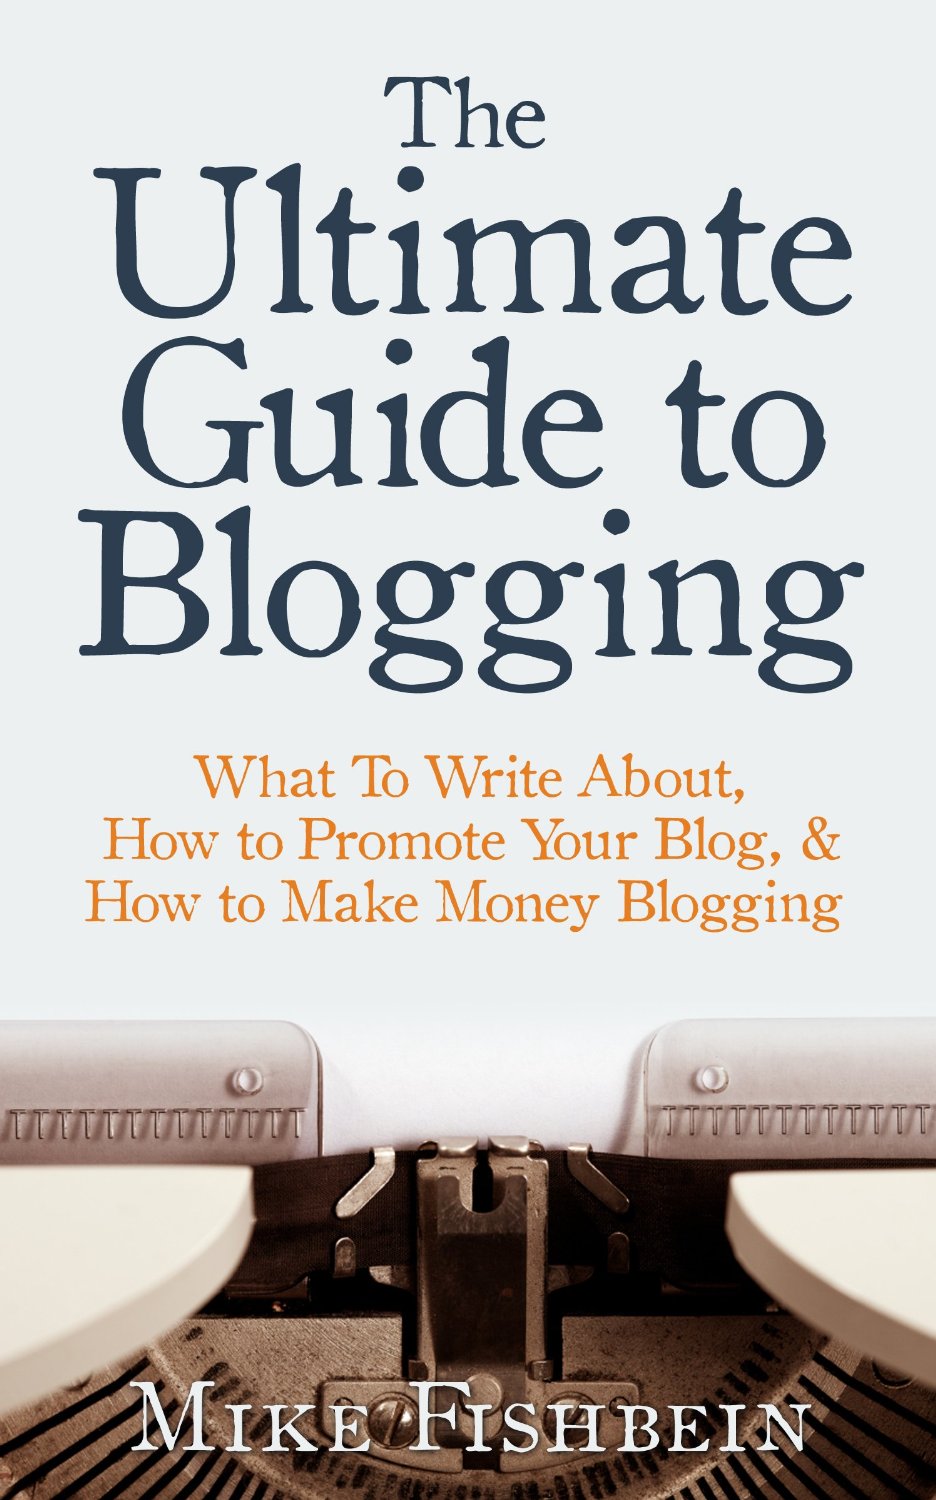 ultimate-guide-to-blogging-fishbein